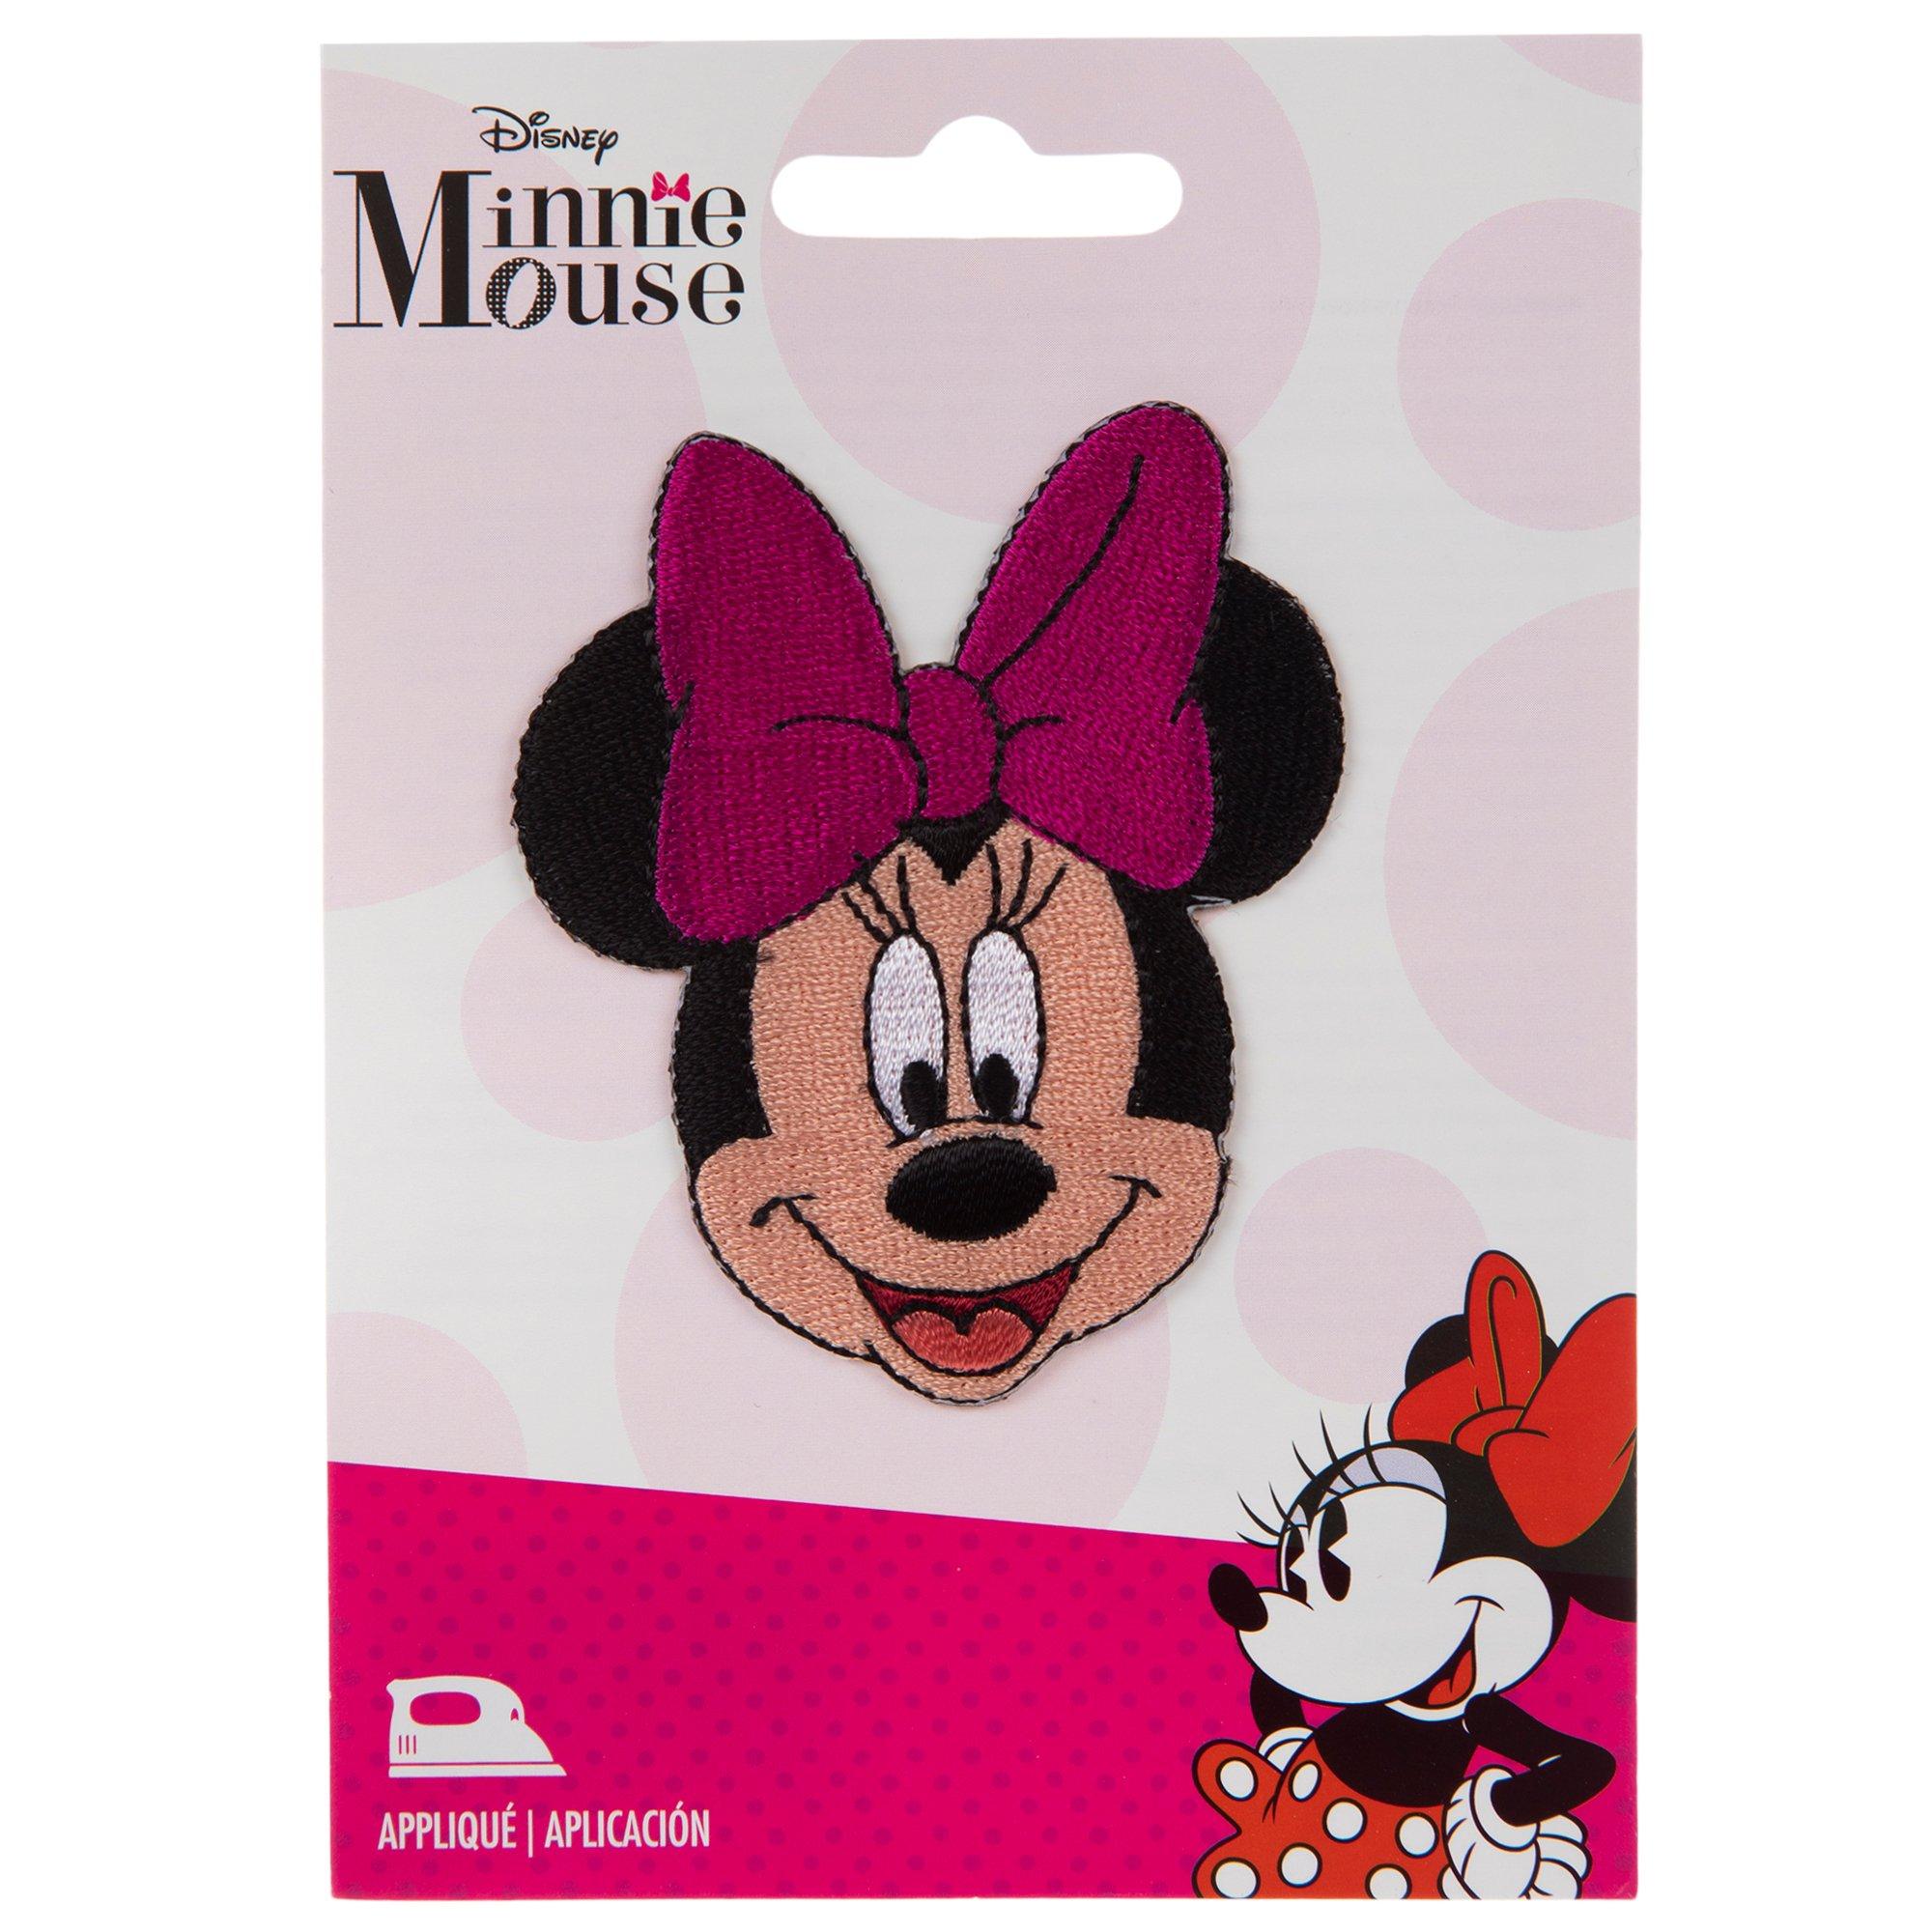 Wrights Disney Mickey Iron-On Minnie Mouse Body with Script Applique,  Original Version, Multi-Colored